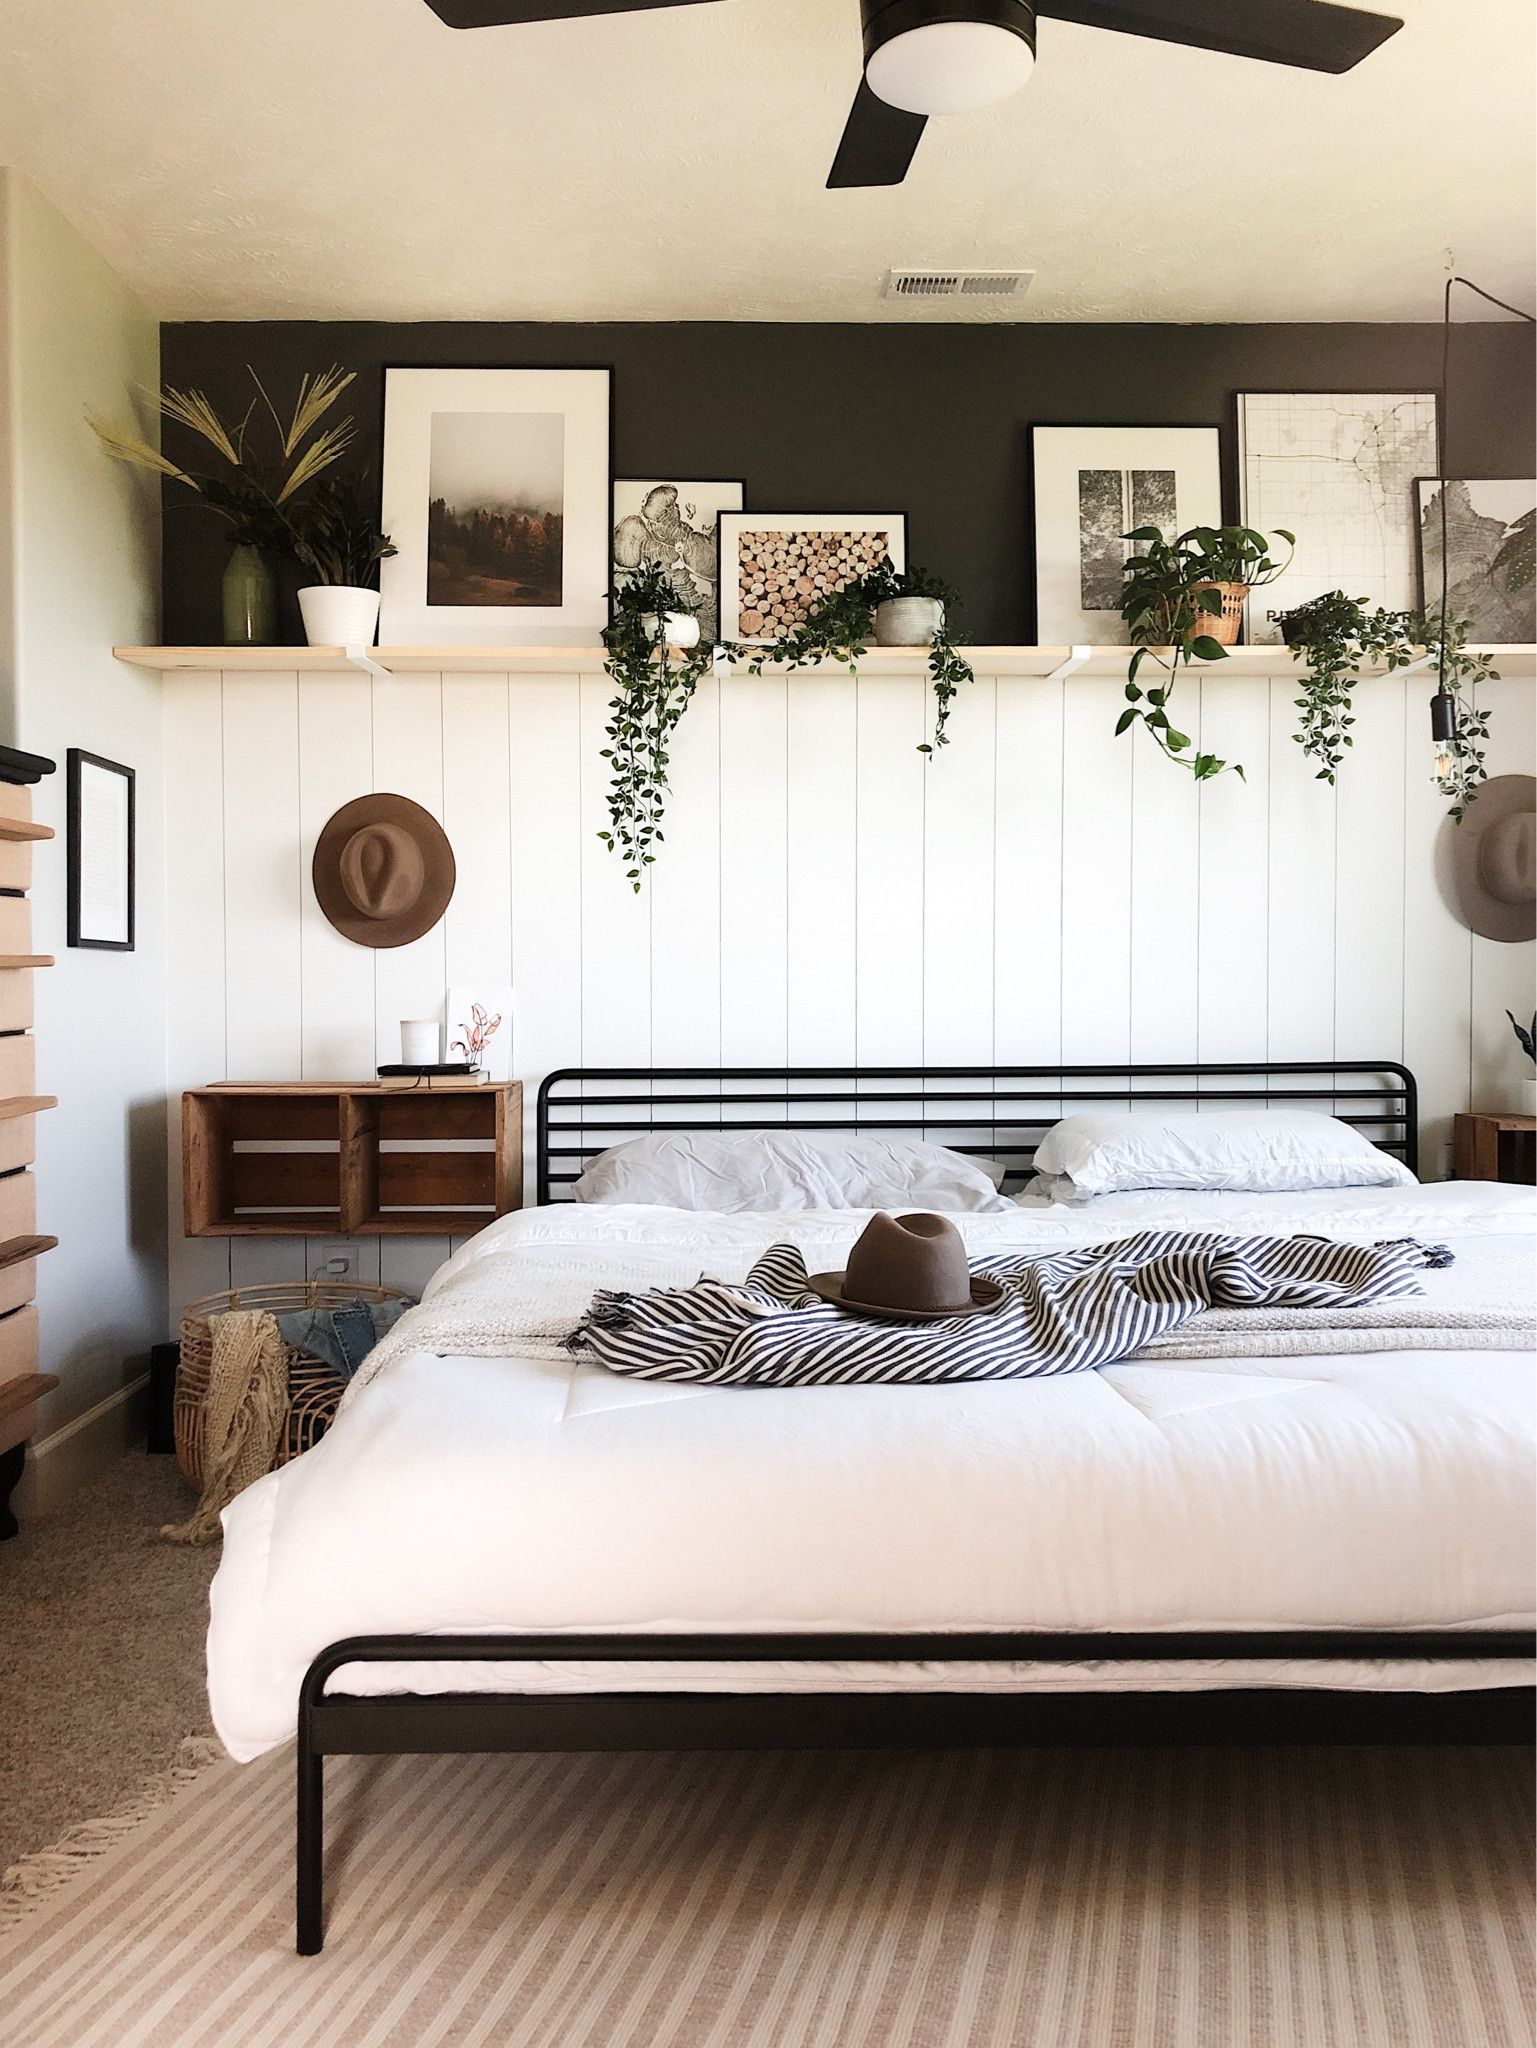 Express Yourself: Bedroom Wall Designs That Reflect Your Personality